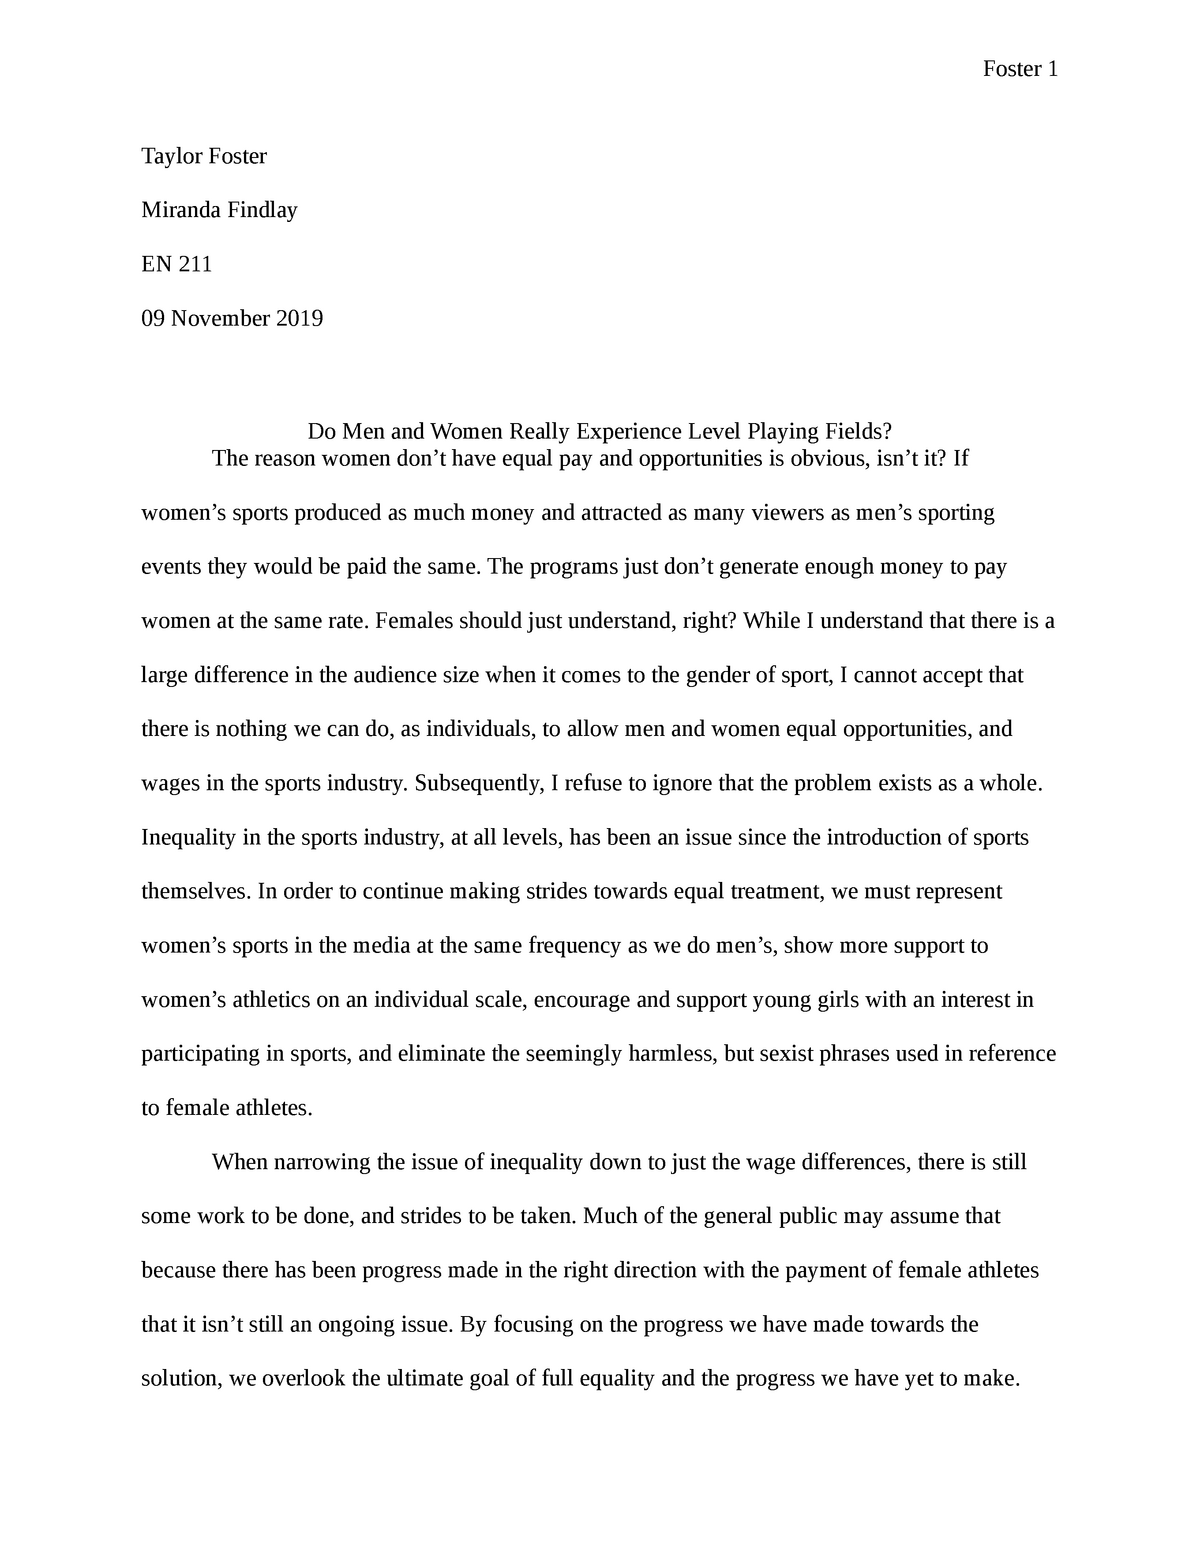 essay on gender equality in sports